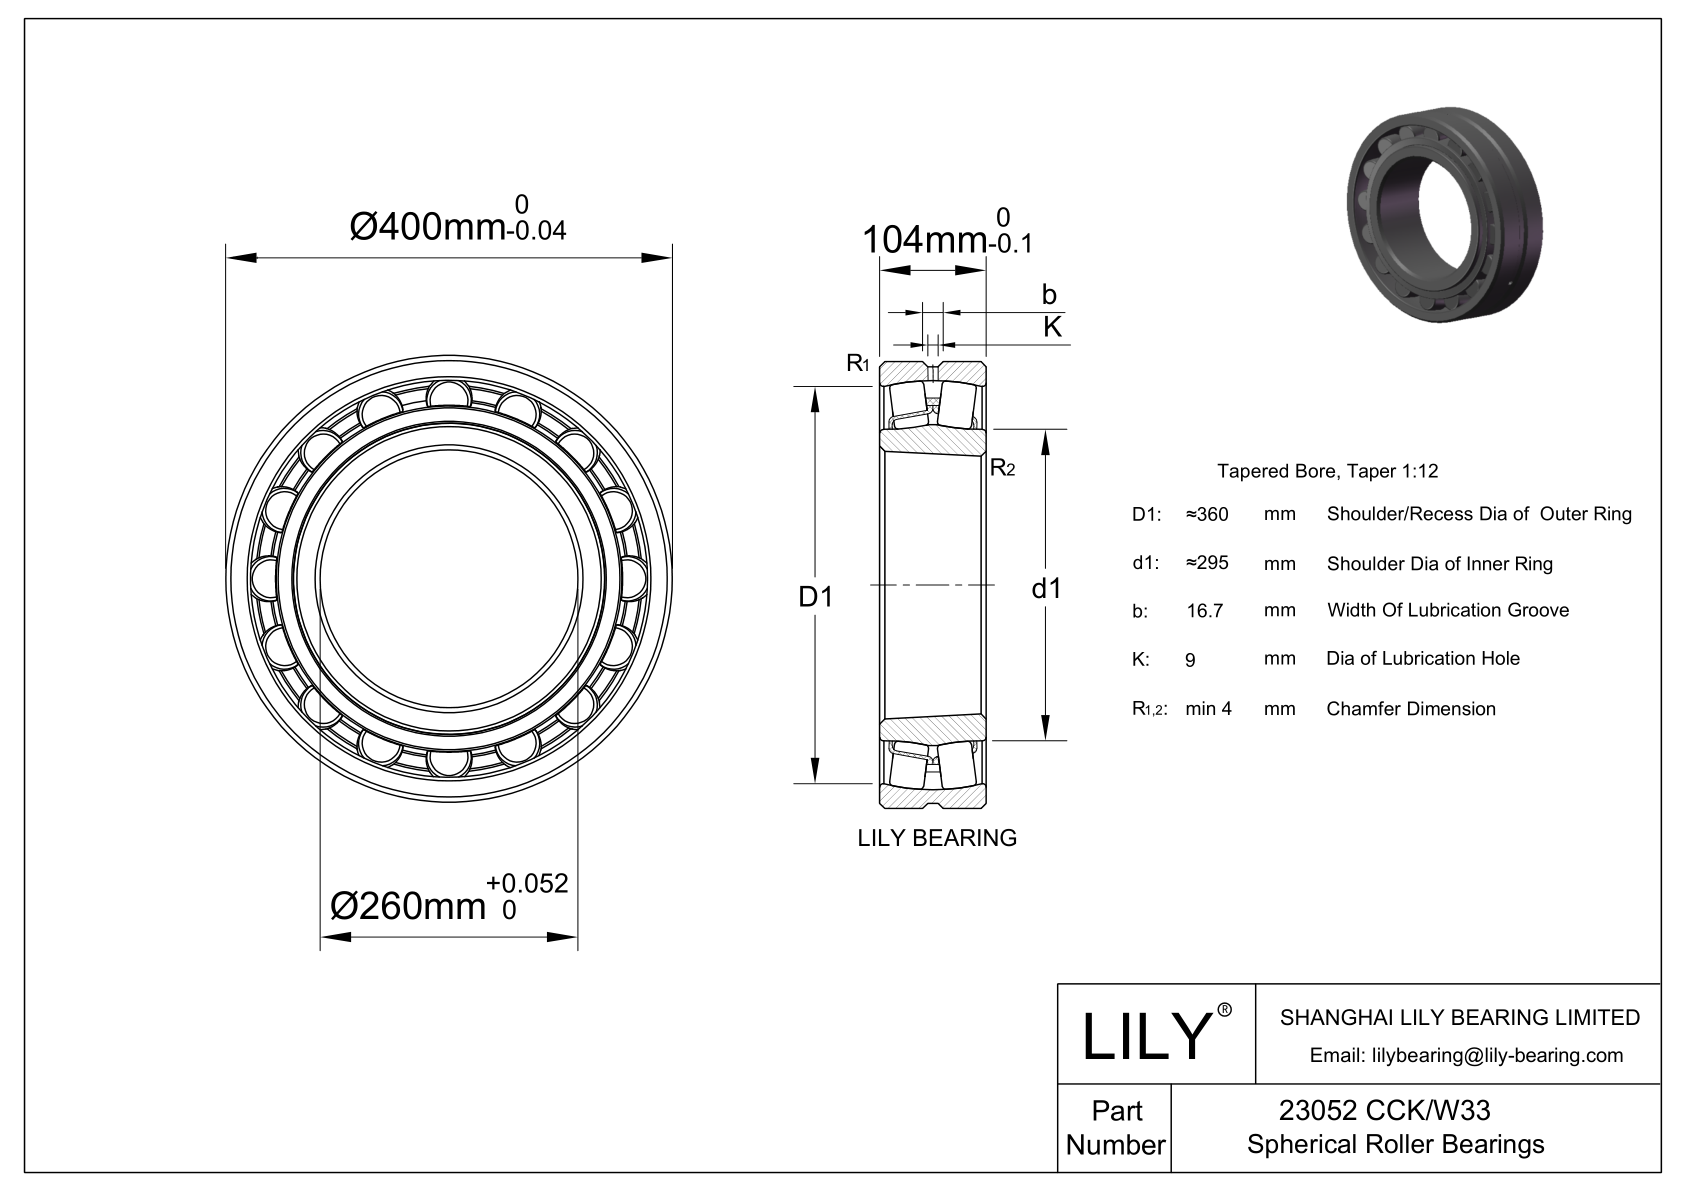 23052 CCK/W33 Double Row Spherical Roller Bearing cad drawing